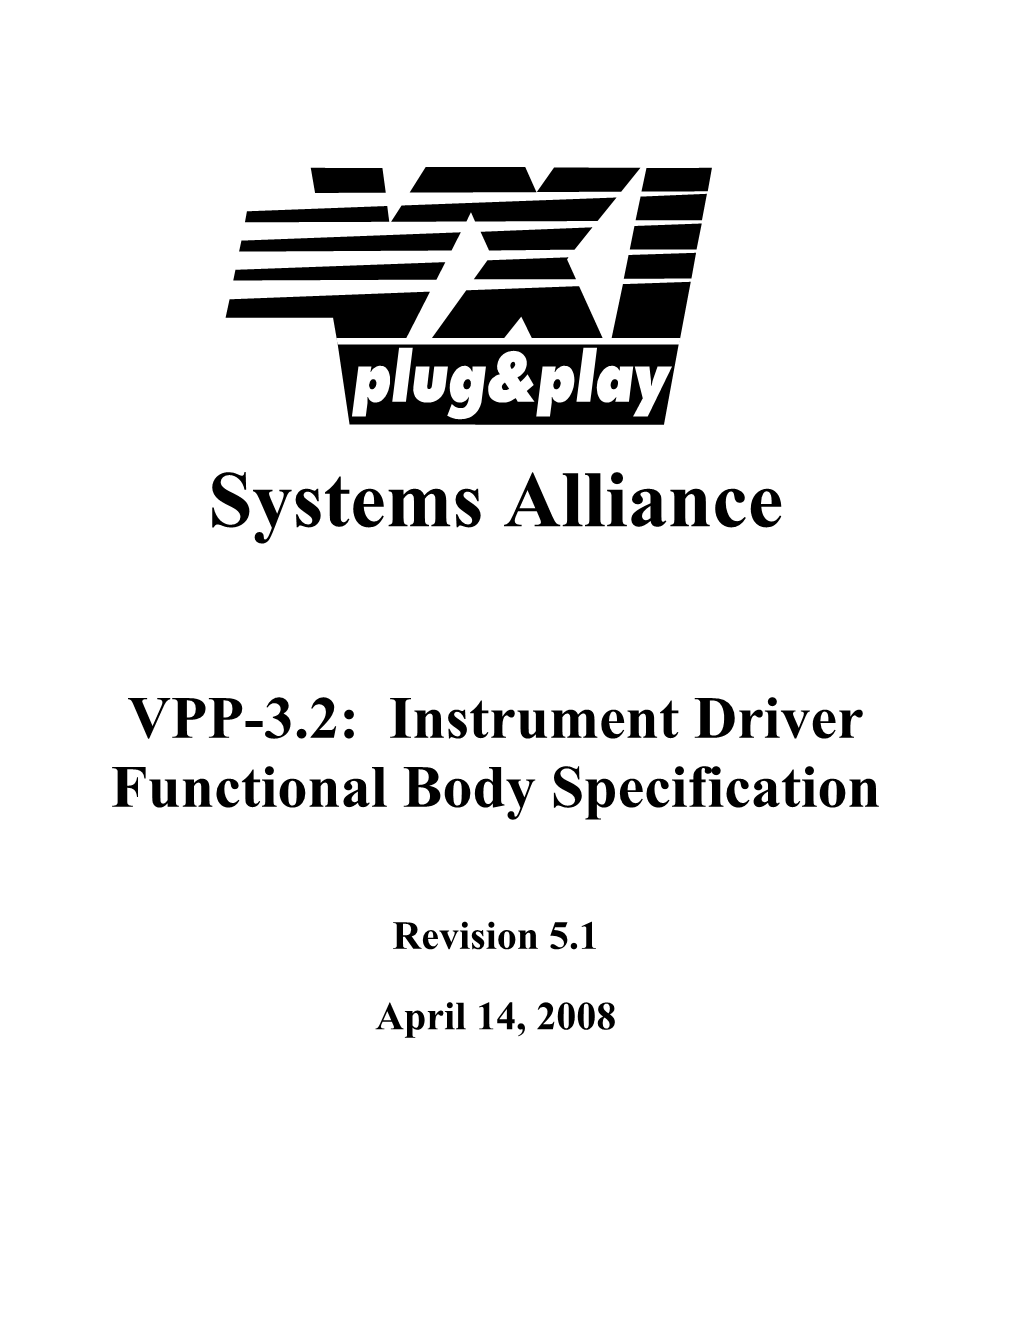 VPP-3.2: Instrument Driver Functional Body Specification